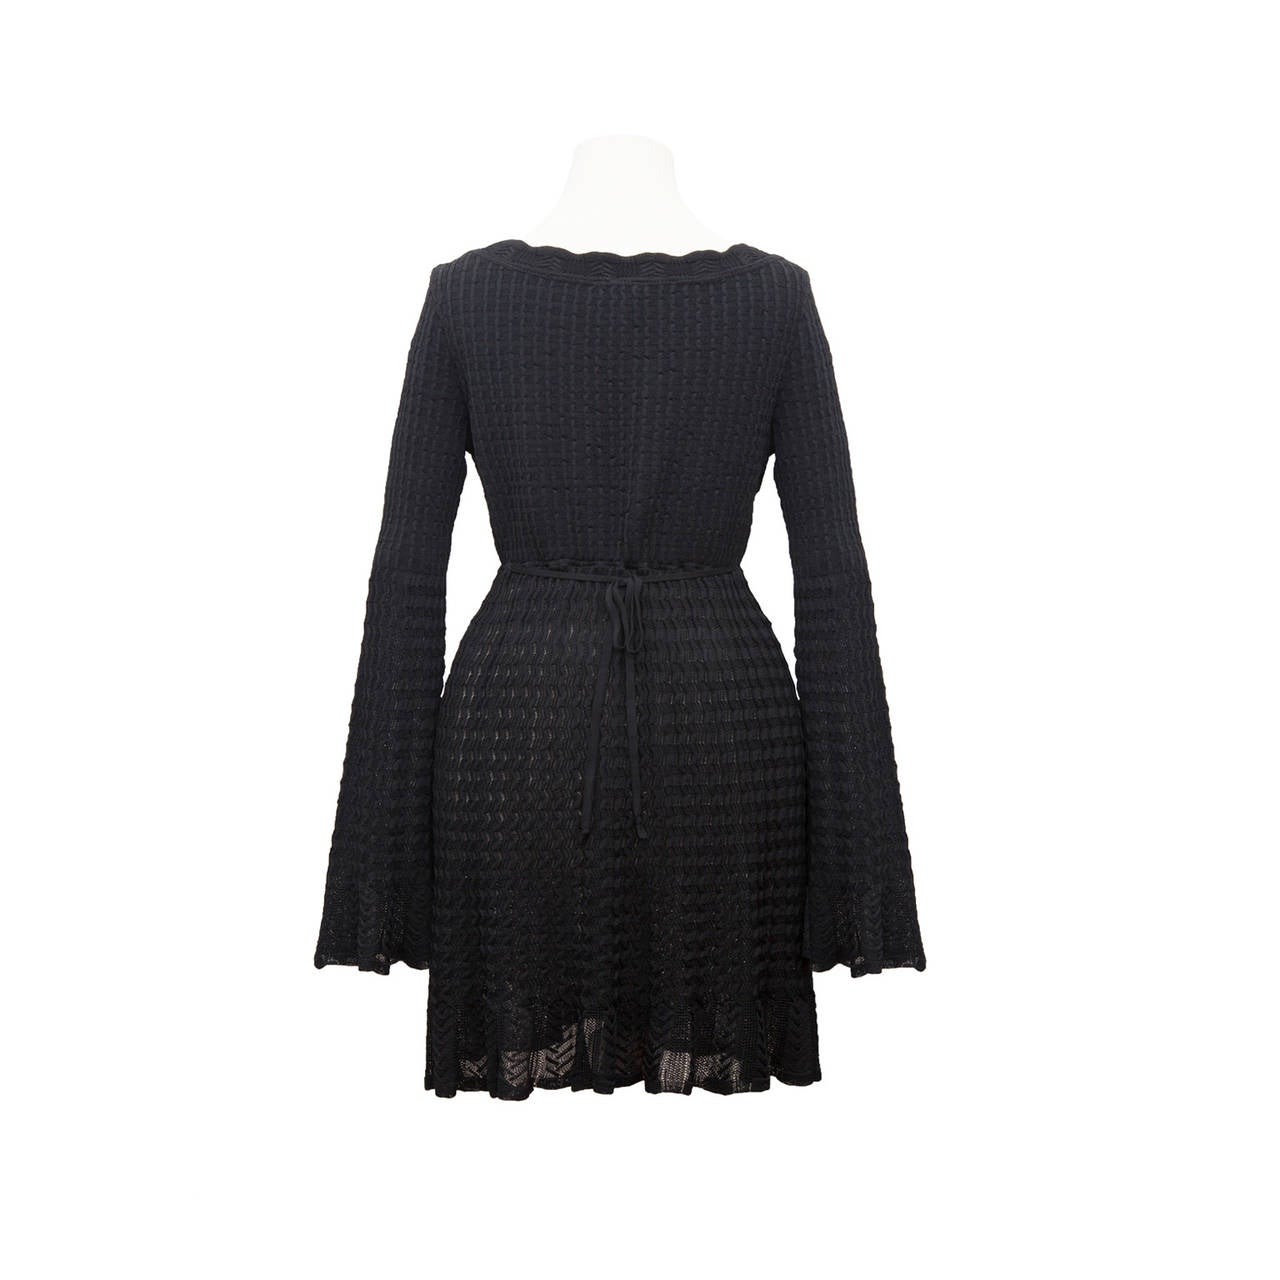 Alaia bell sleeve black knit dress with loose tie at the back. 
Made in Itay, 90% viscose, 6% nylon, 4% elastic
Size : M
Measurments : 
Shoulders - 37cm
waist: - 64 cm
sleeves - 65 cm
total length - 75cm